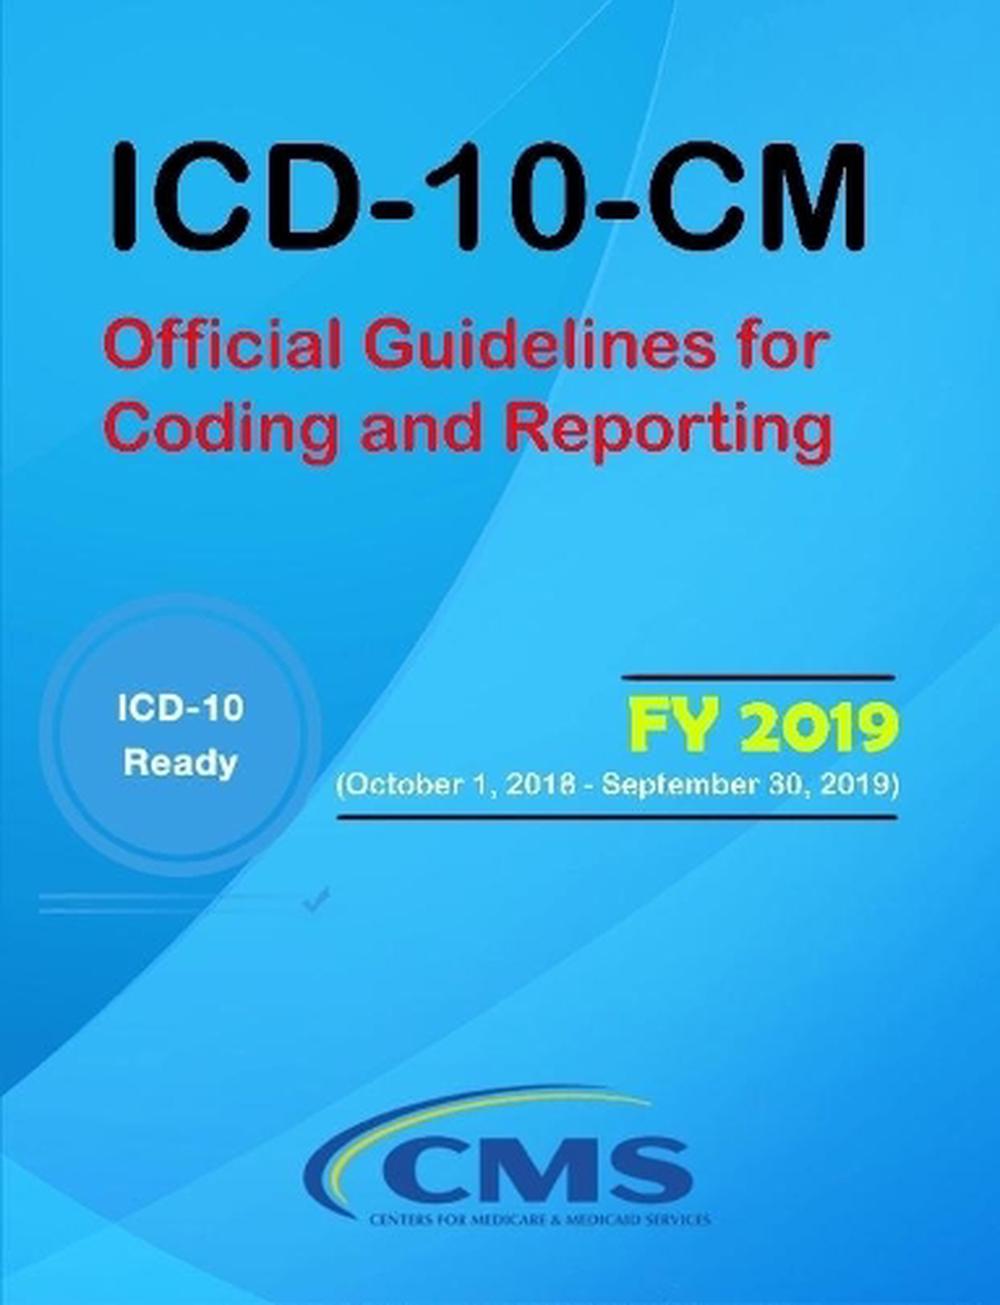 Icd 10 Cm Official Guidelines For Coding And Reporting Fy 2019